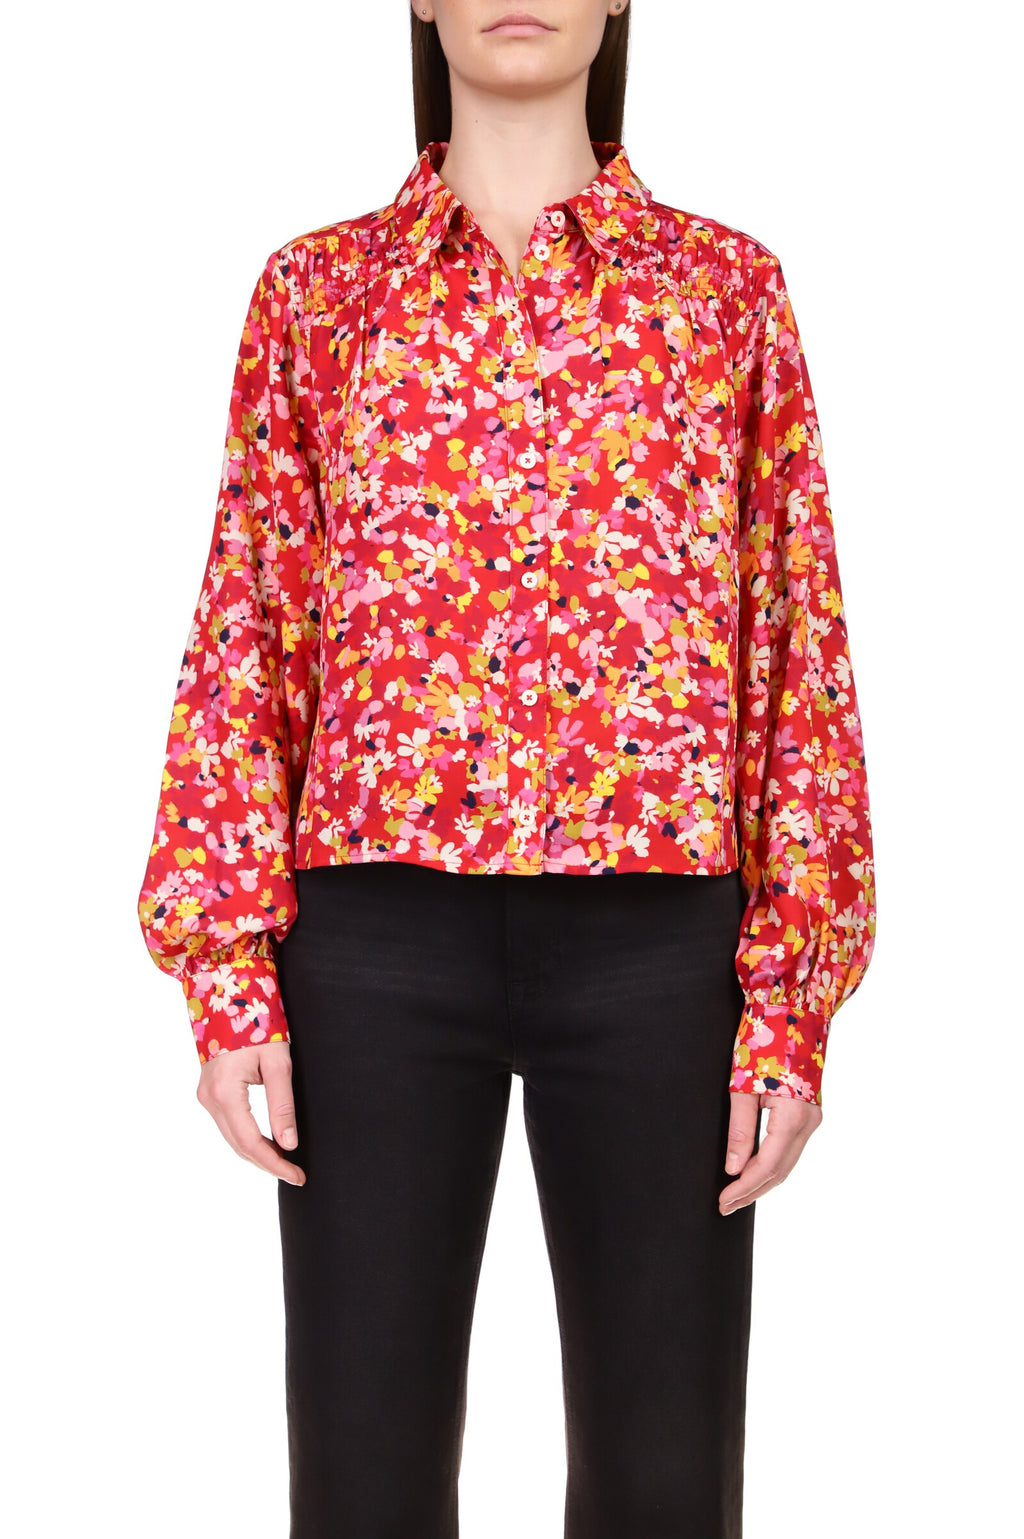 New Day Red/Pink Floral Print Blouse**FINAL SALE**